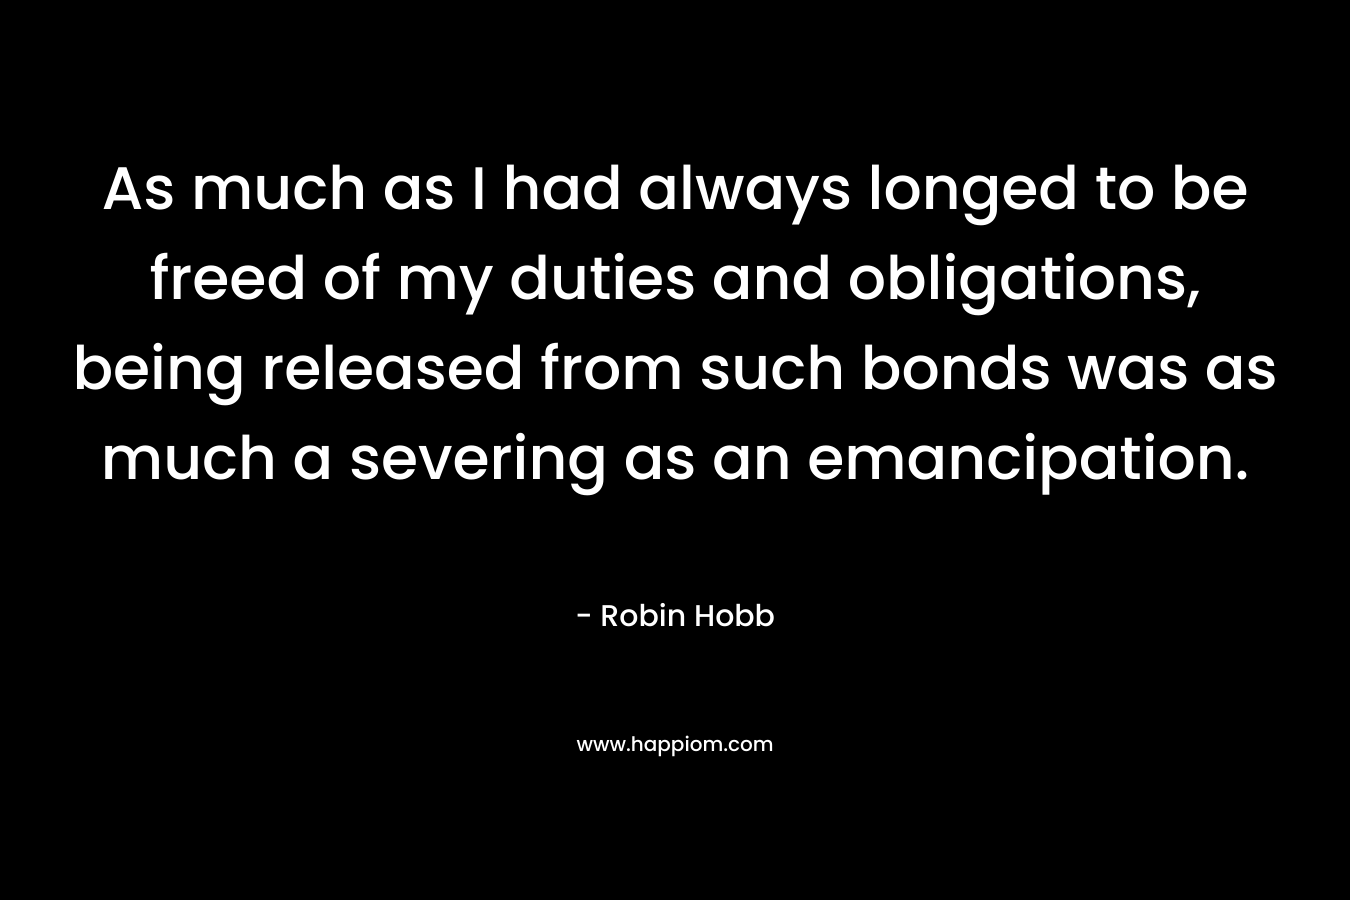 As much as I had always longed to be freed of my duties and obligations, being released from such bonds was as much a severing as an emancipation. – Robin Hobb